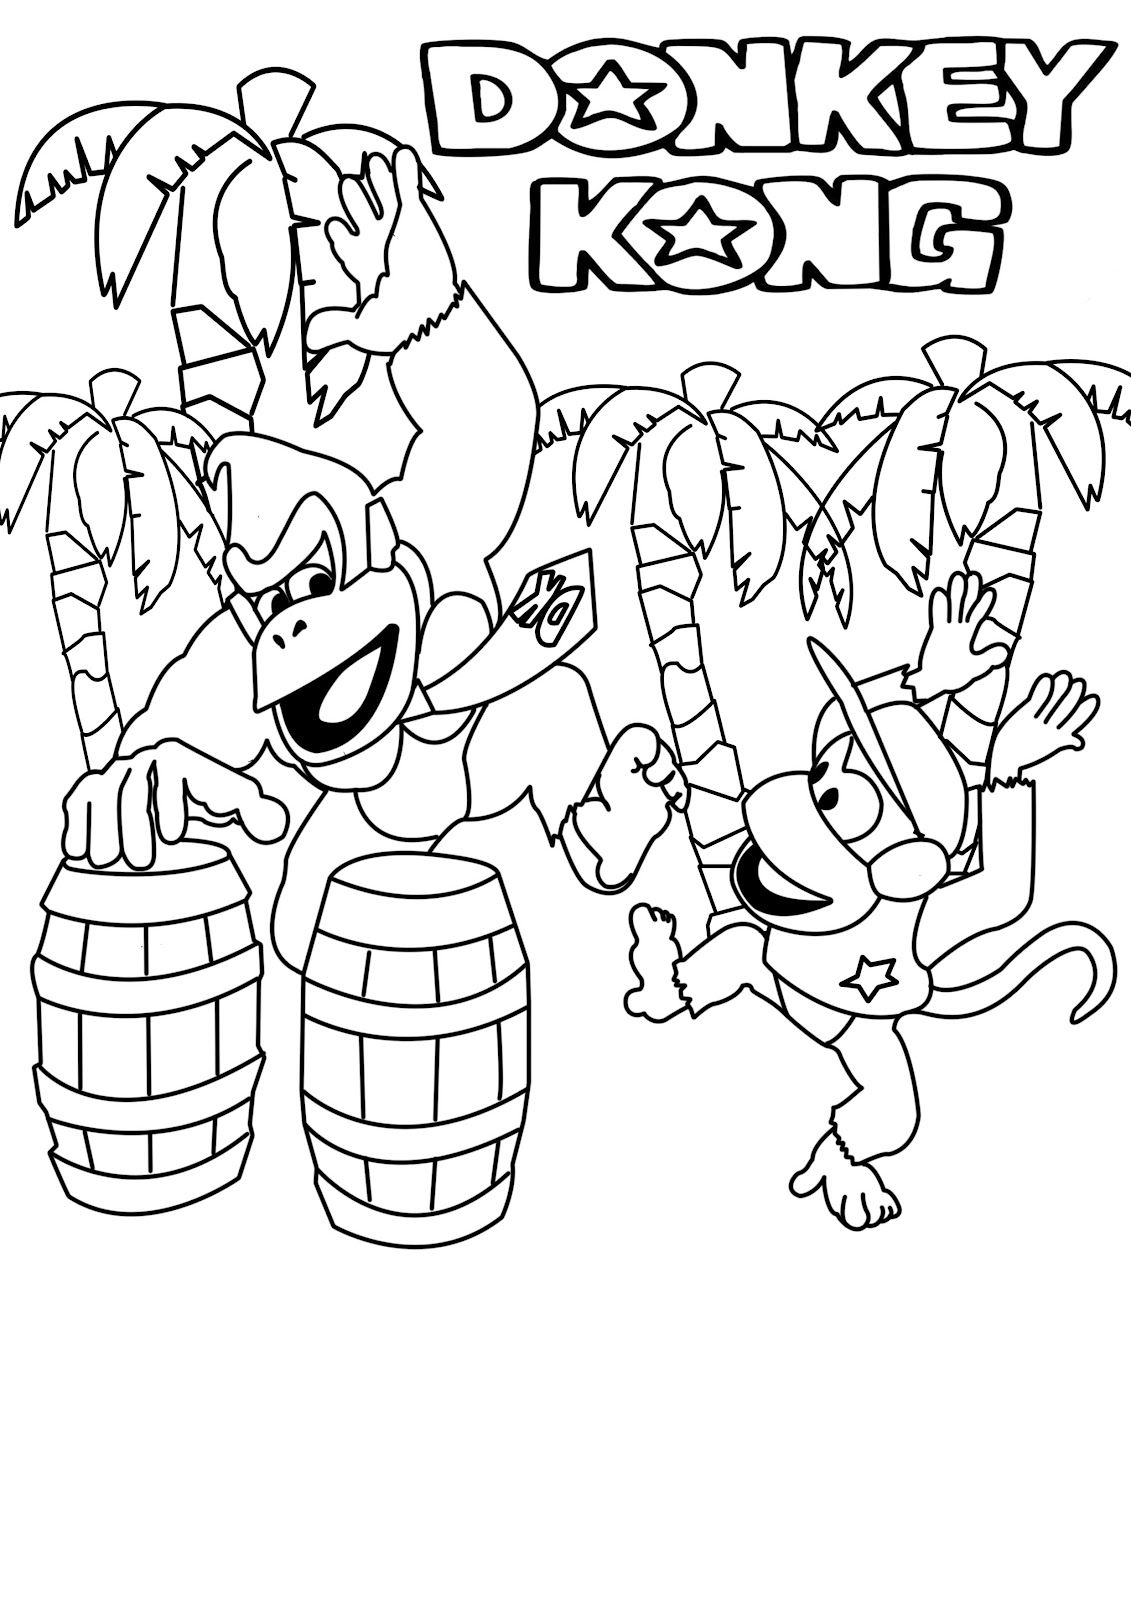 Donkey Kong 19 Coloring Pages